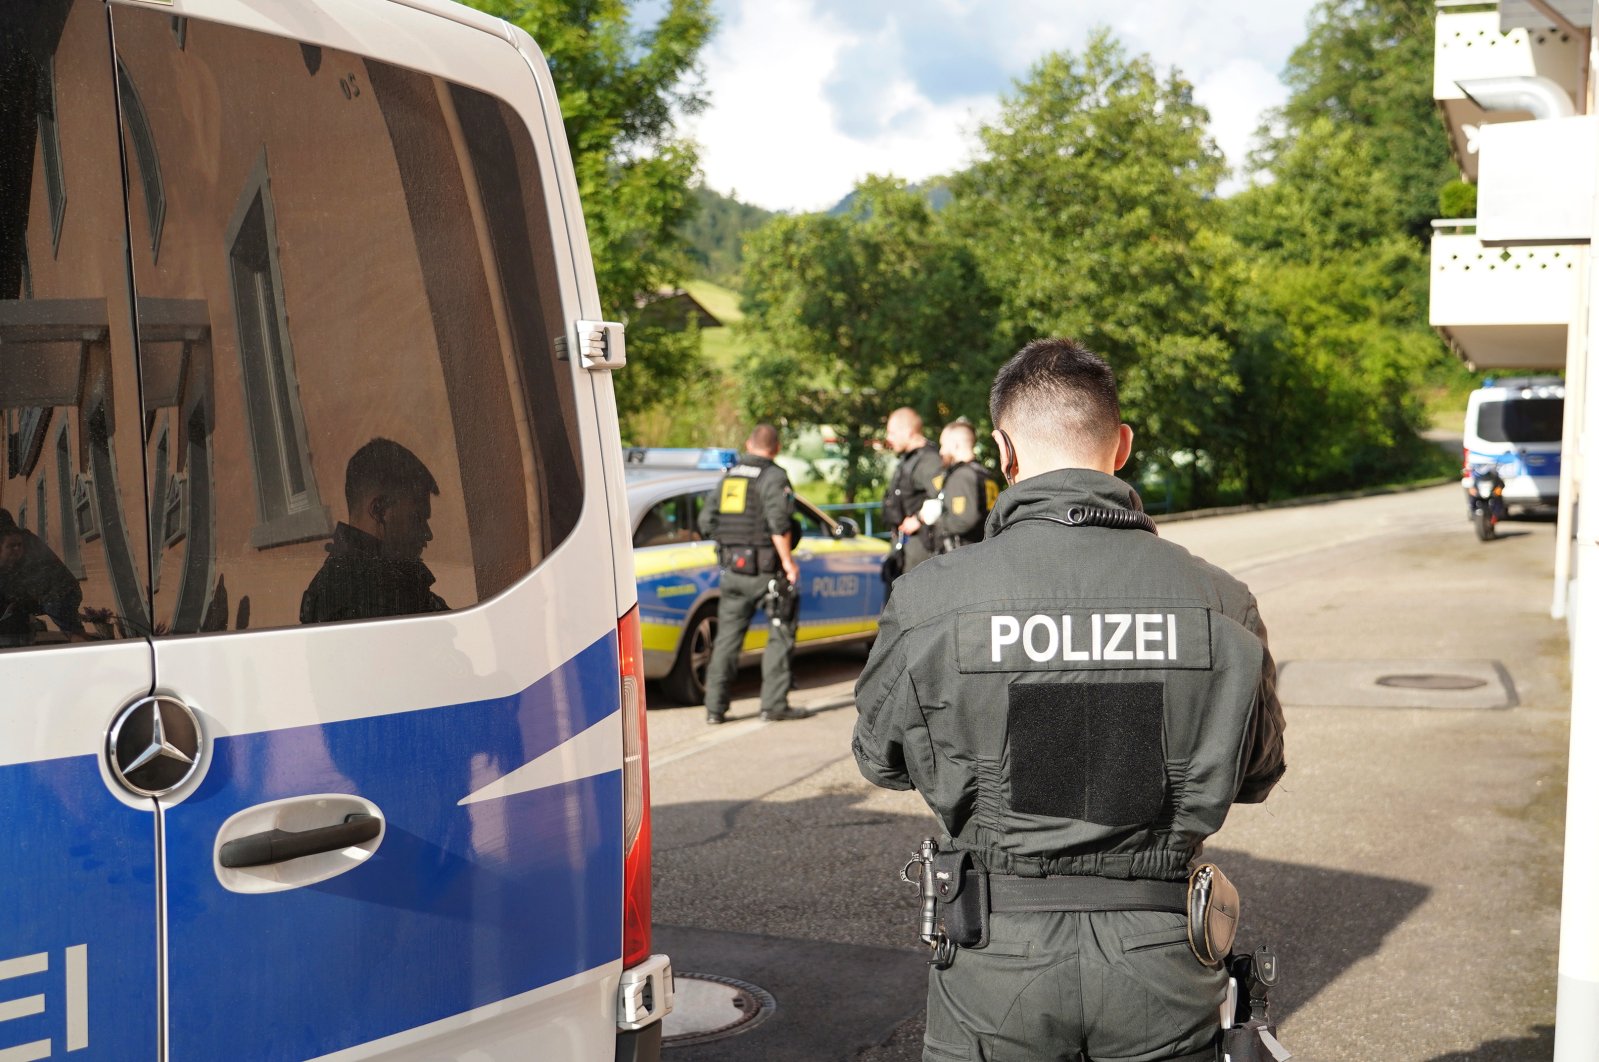 Emergency services and police block off the access to the Ramsbach district of Oppenau, Germany, July 17, 2020. (AP Photo)